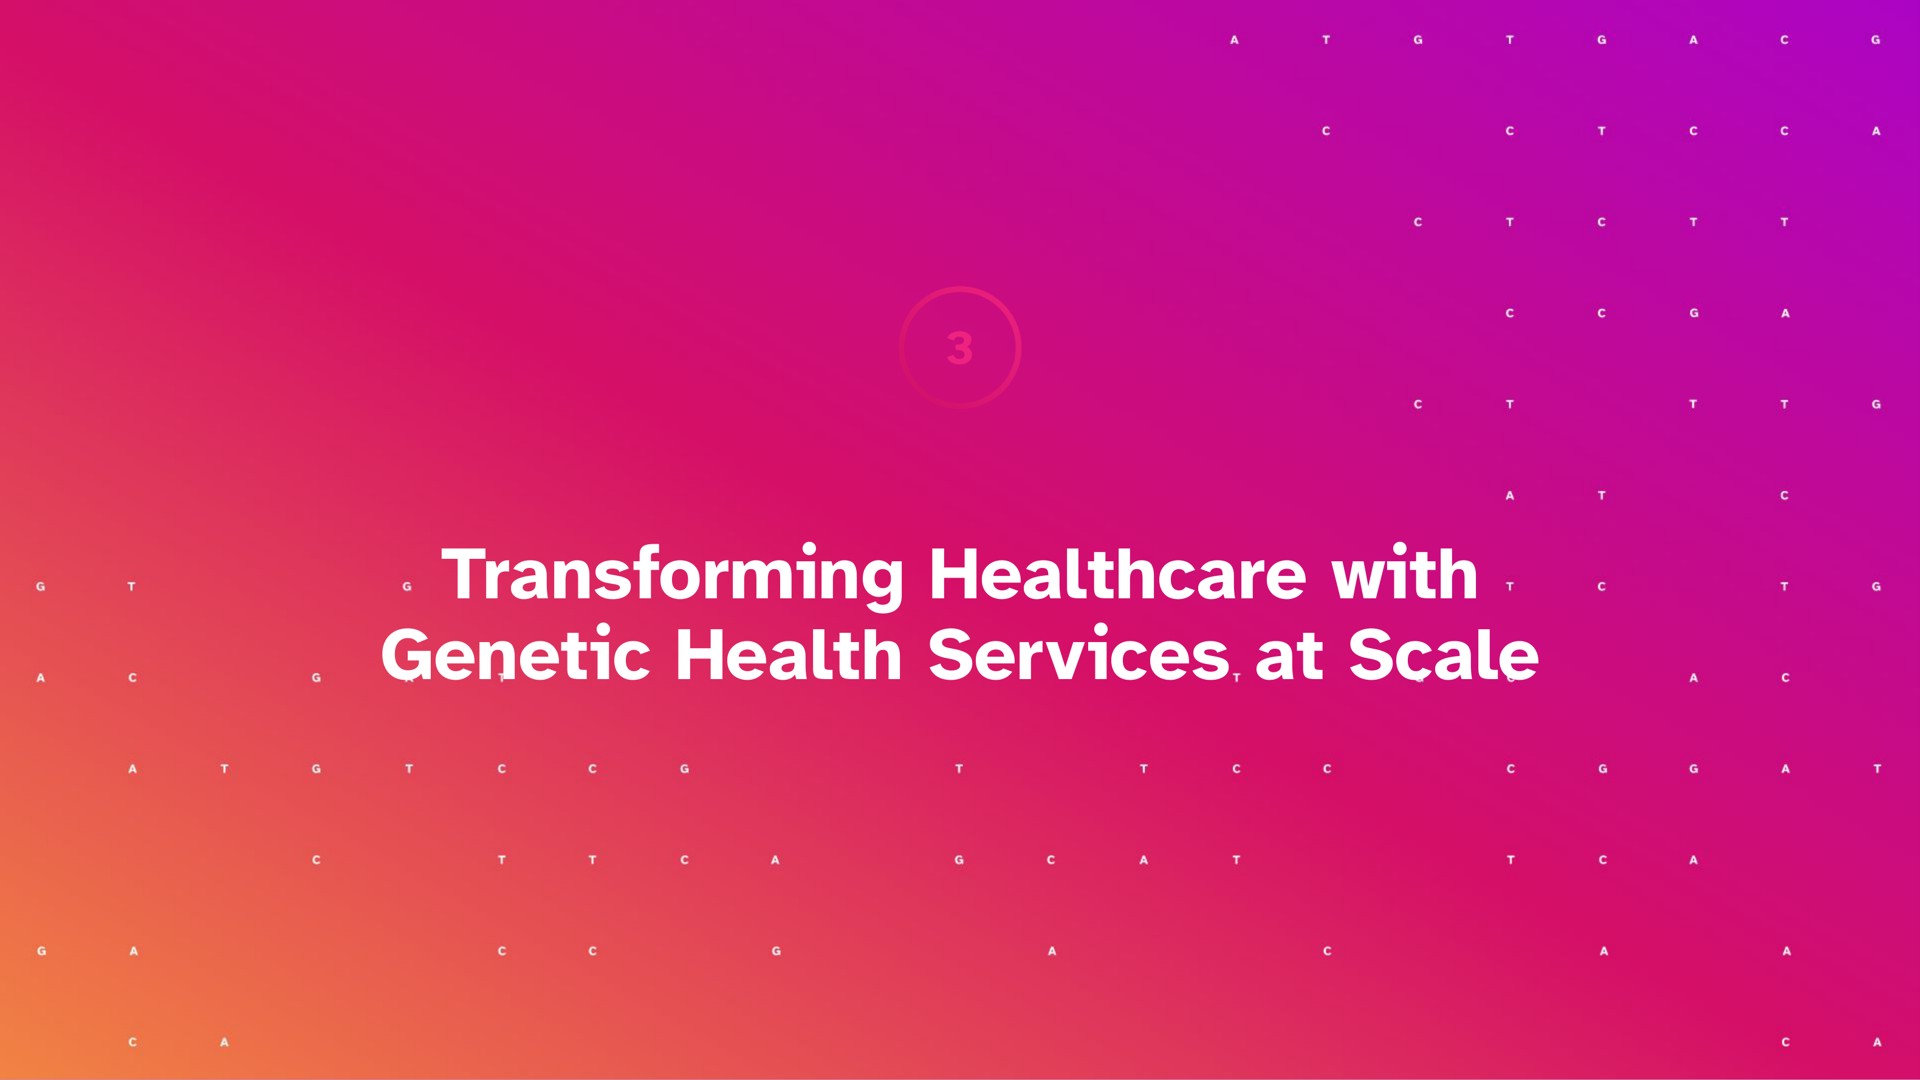 transforming with genetic health services at scale | 23andMe